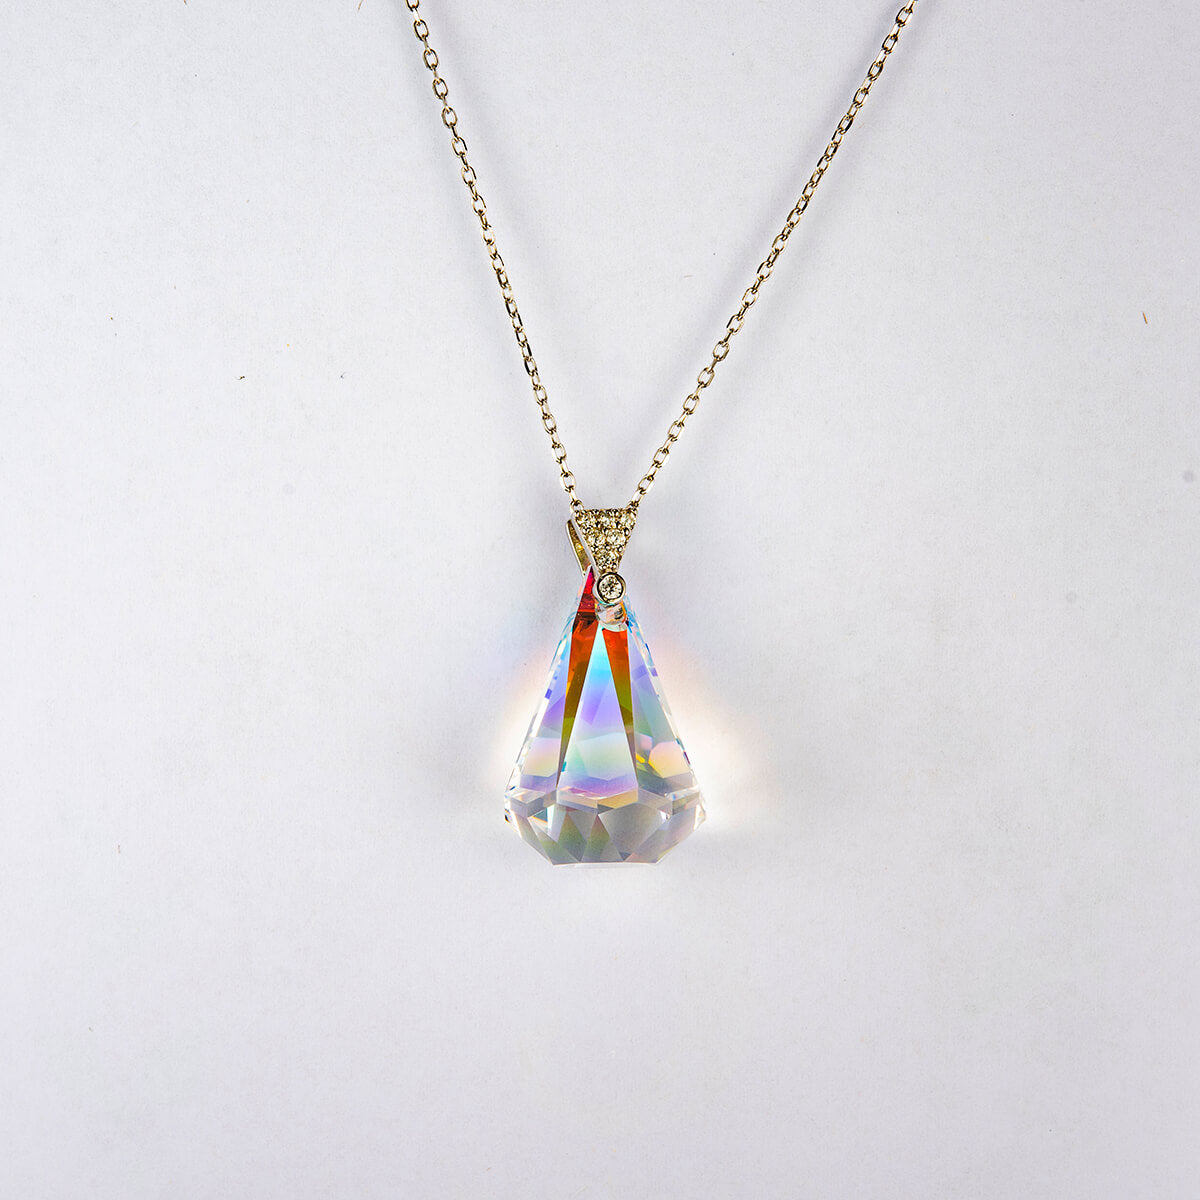 Northern Lights Teardrop Necklace - 24 Style